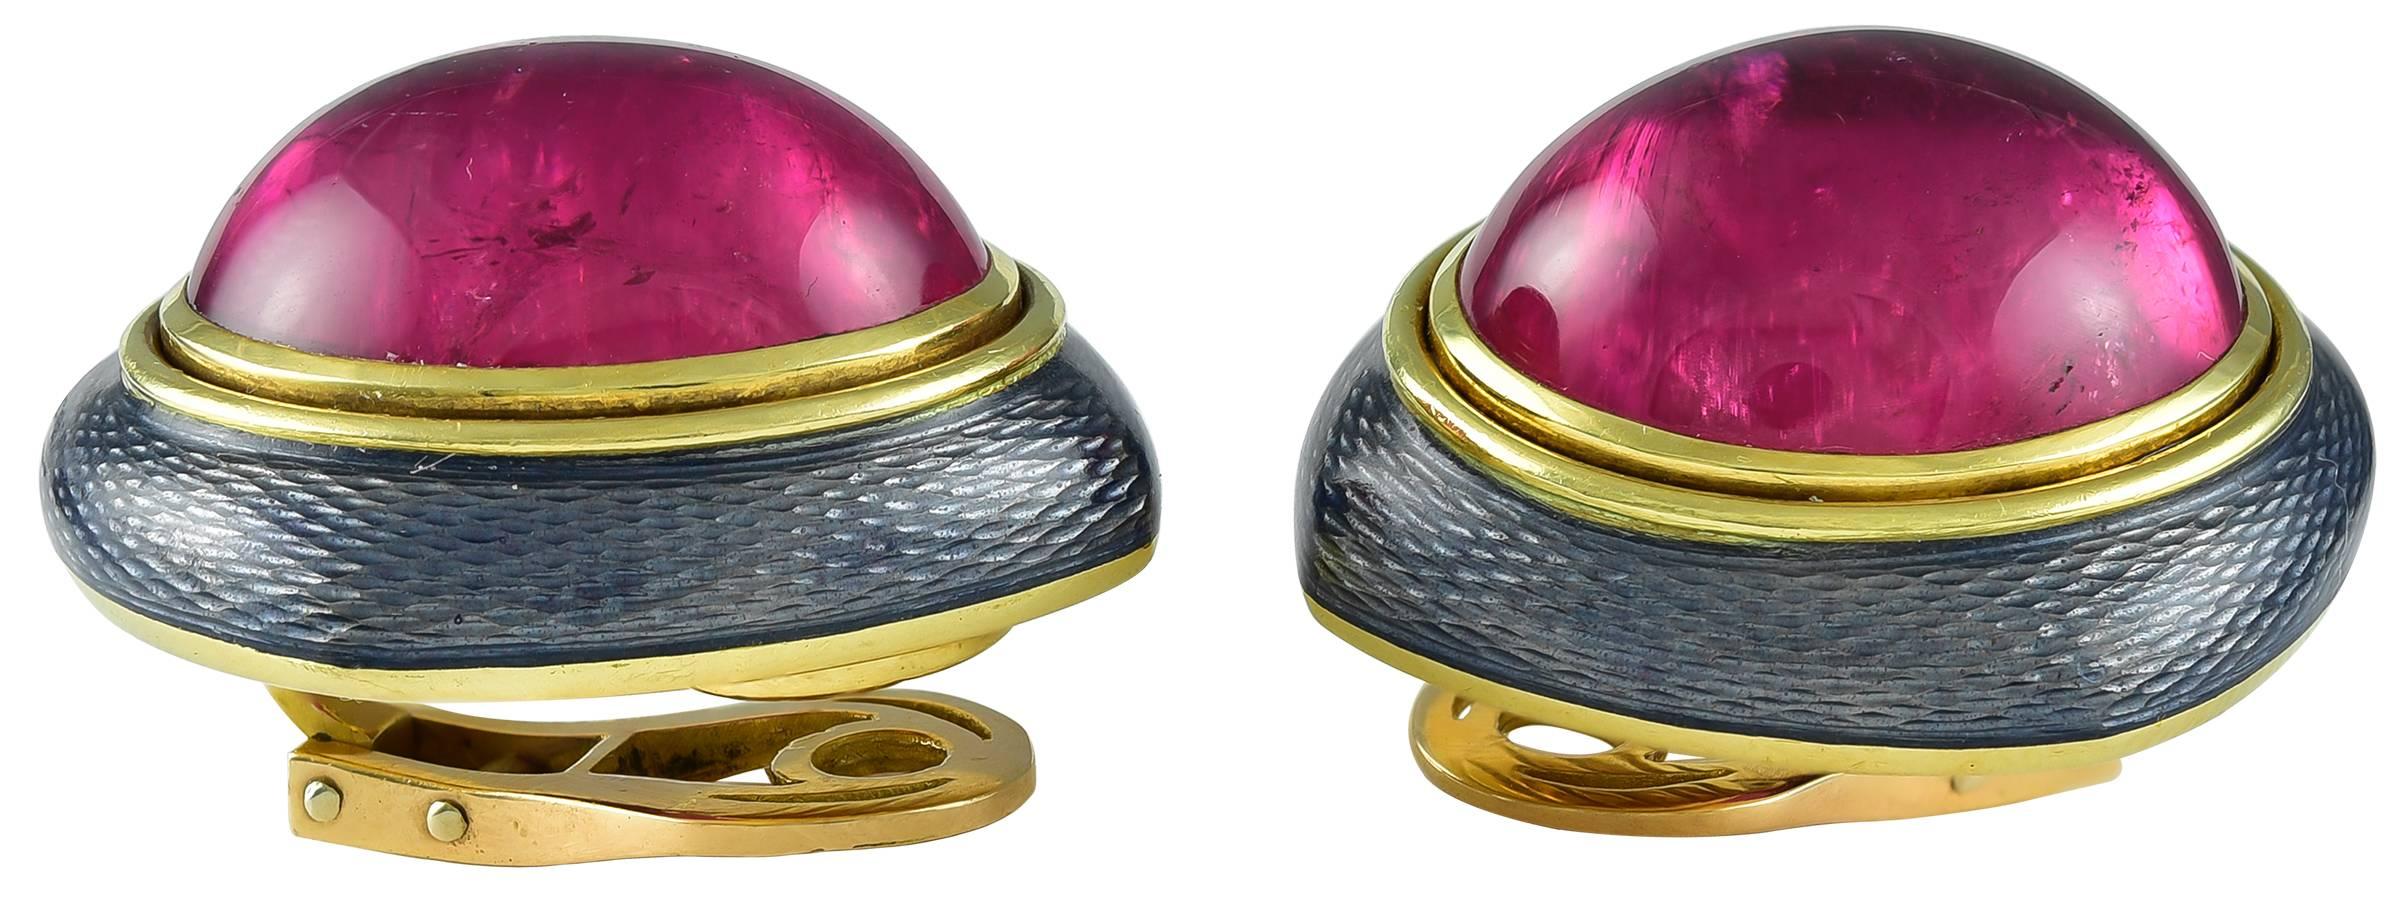 Impressive tourmaline earclips featuring two spectacular candy pink oval cabochons weighing 49.83 carats, within handsome textured grey enamel frames, all mounted in polished 18kt gold, signed DeVroomen for Leo DeVroomen, with full English marks